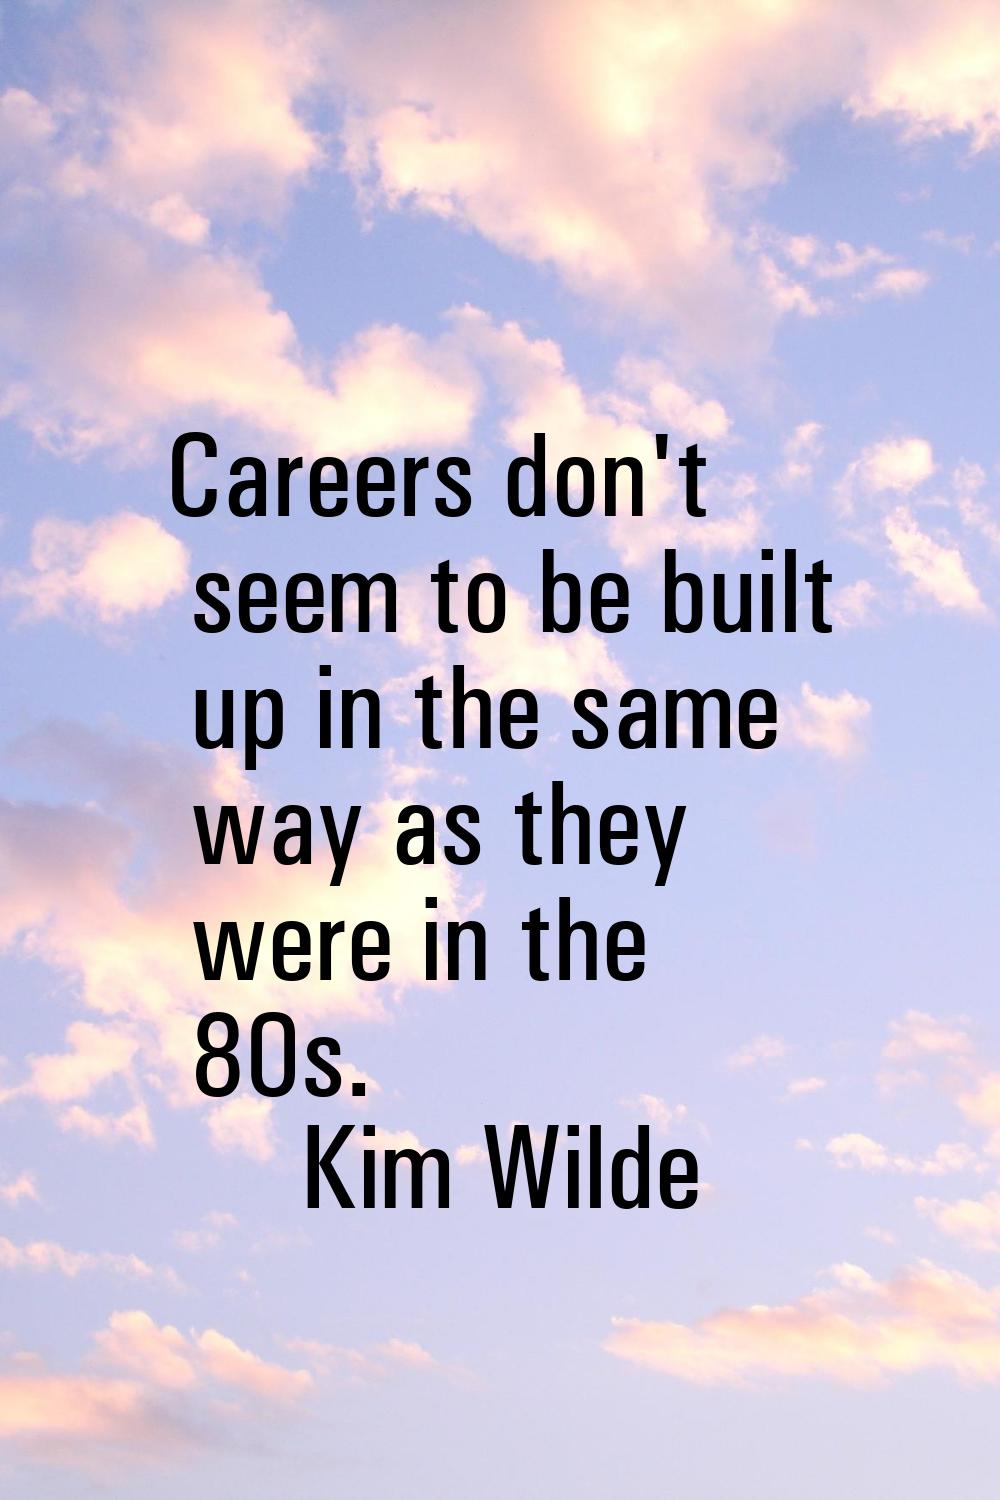 Careers don't seem to be built up in the same way as they were in the 80s.